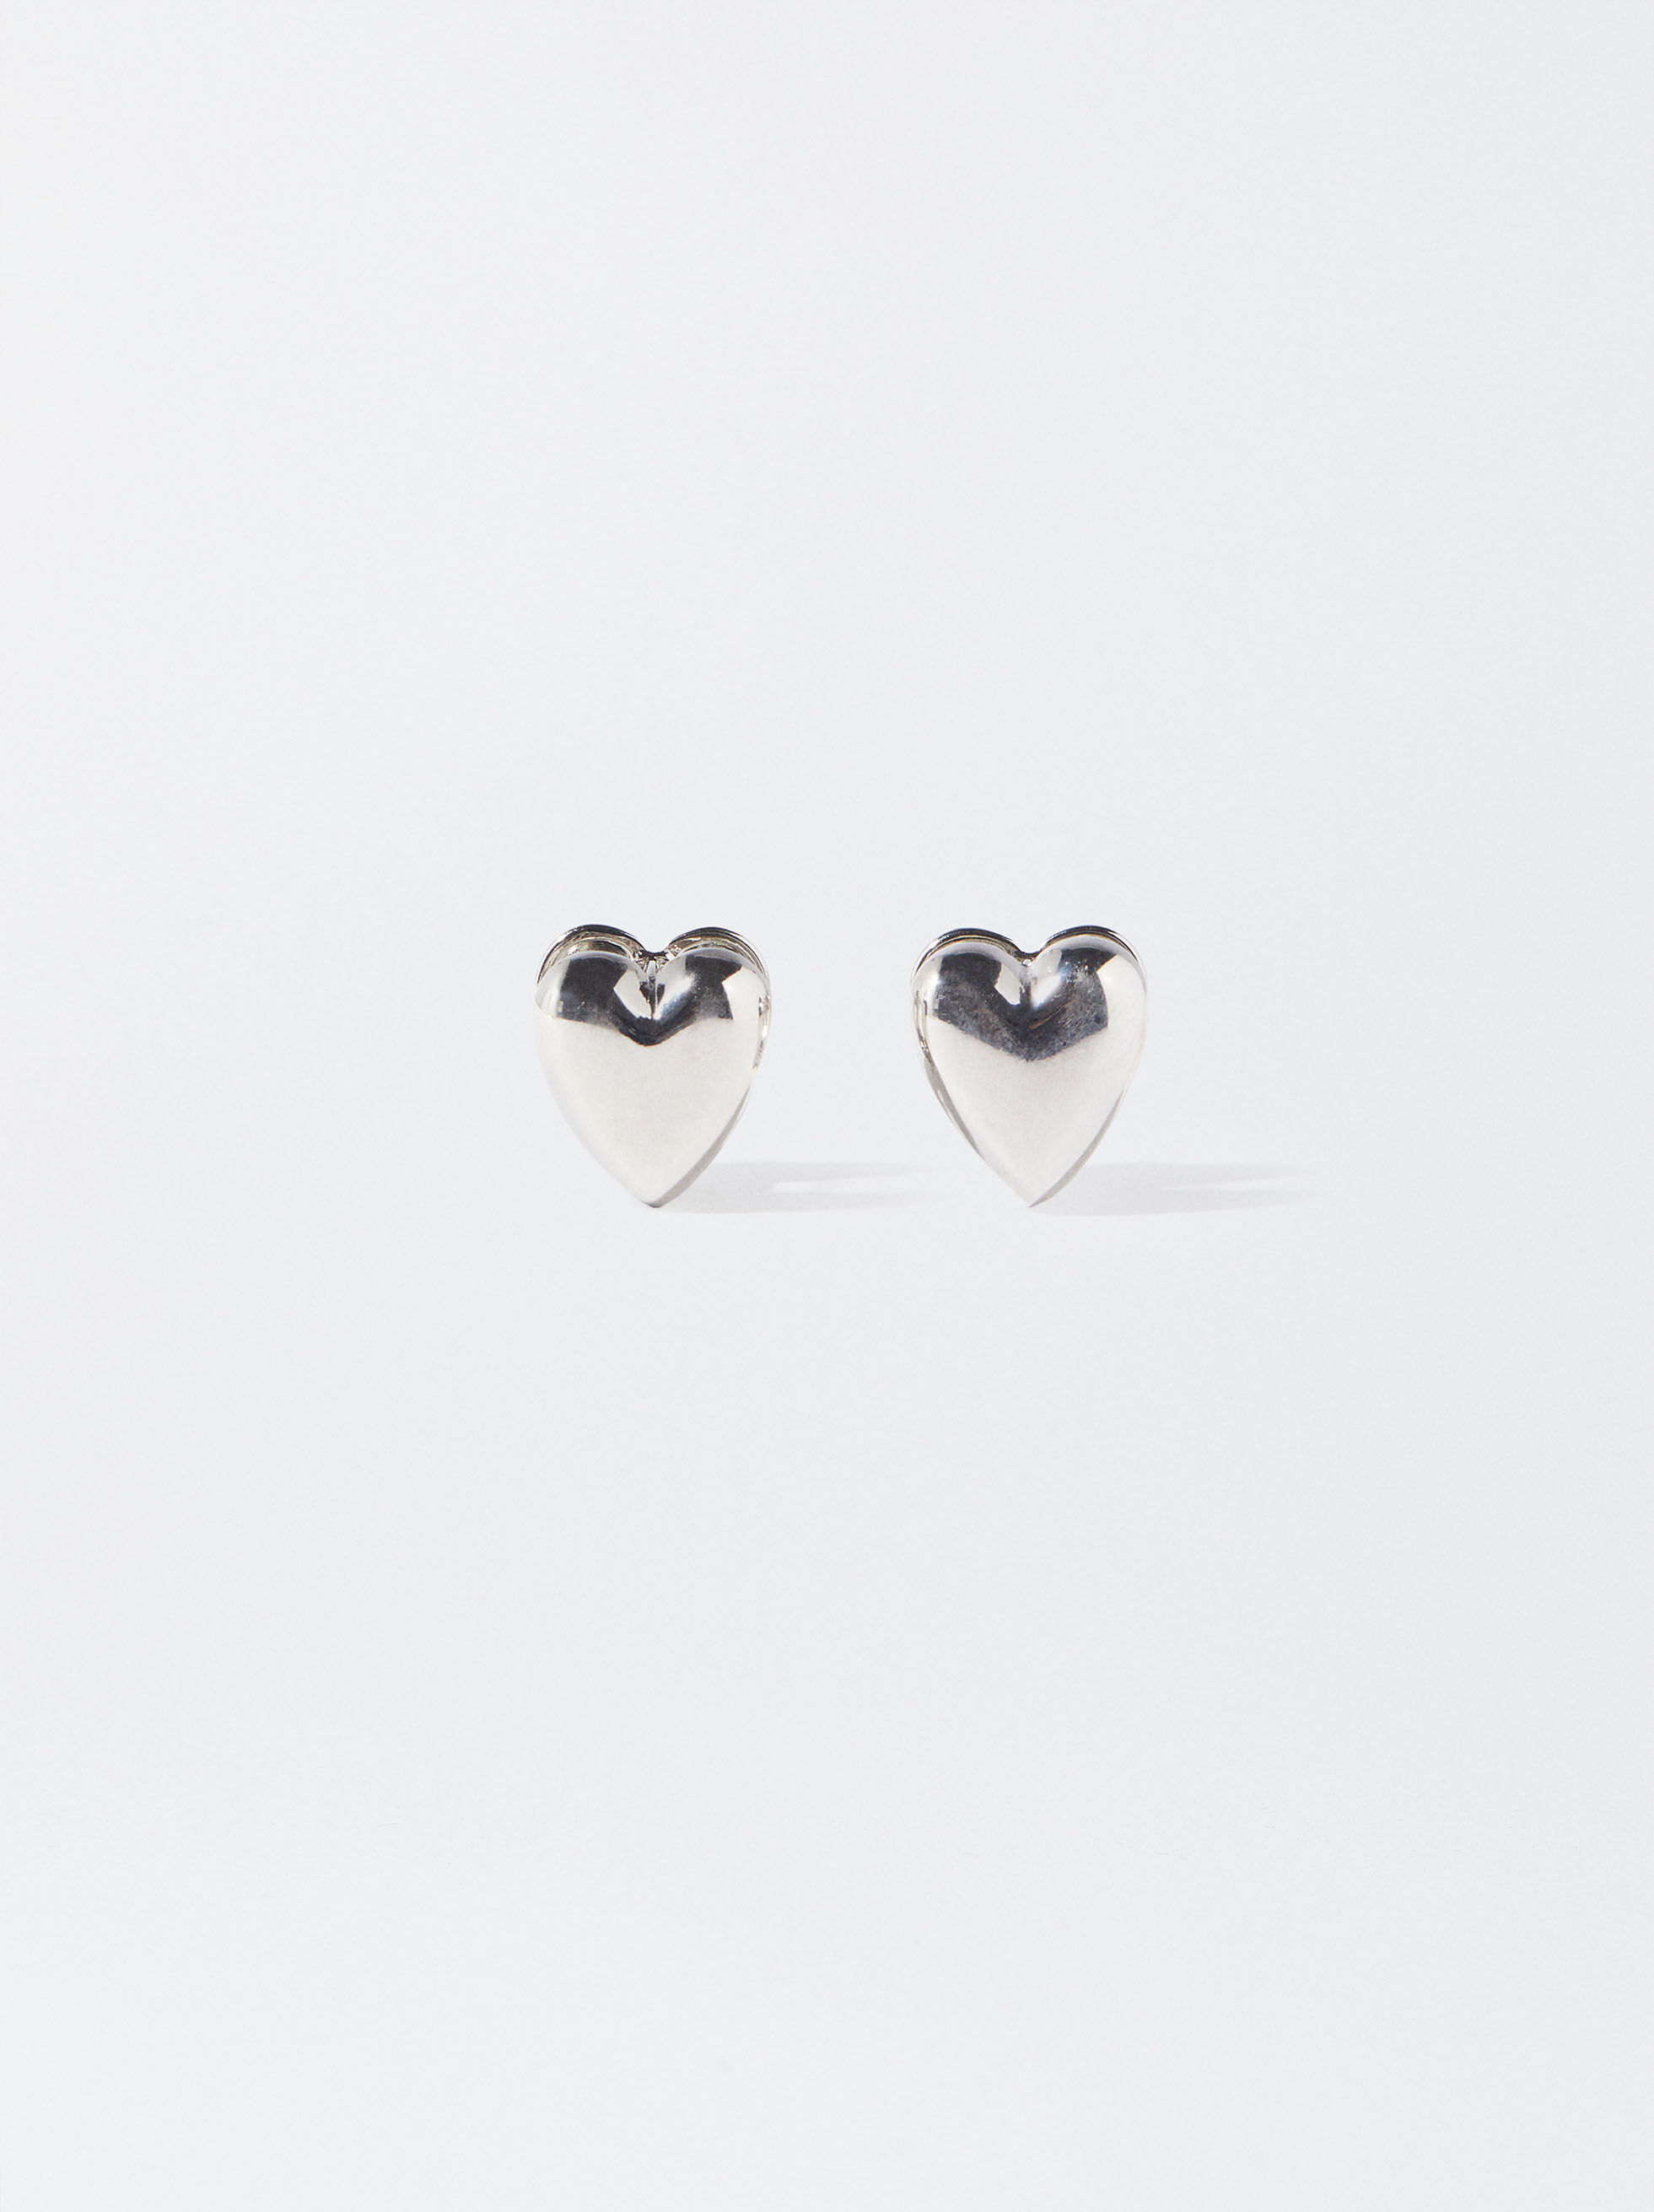 Amazon.com: Cute Heart Dangle Hoop Earrings 925 Sterling Silver for Women  Teen Girls Love Hearts Drop Cartilage Small Huggie Hoops Earring  Hypoallergeni Piercing Cuffs Fashion Jewelry Gifts Valentine's Day:  Clothing, Shoes &